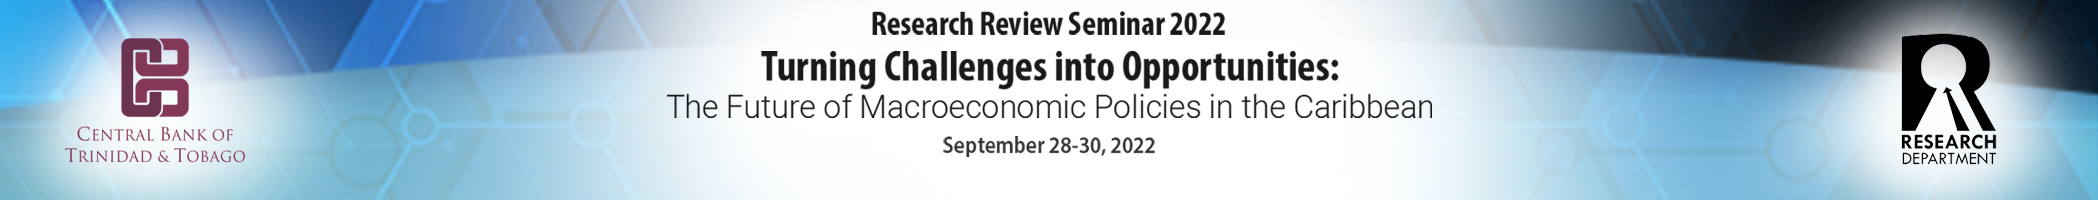 Research Review Seminar 2022 - Call for Papers 